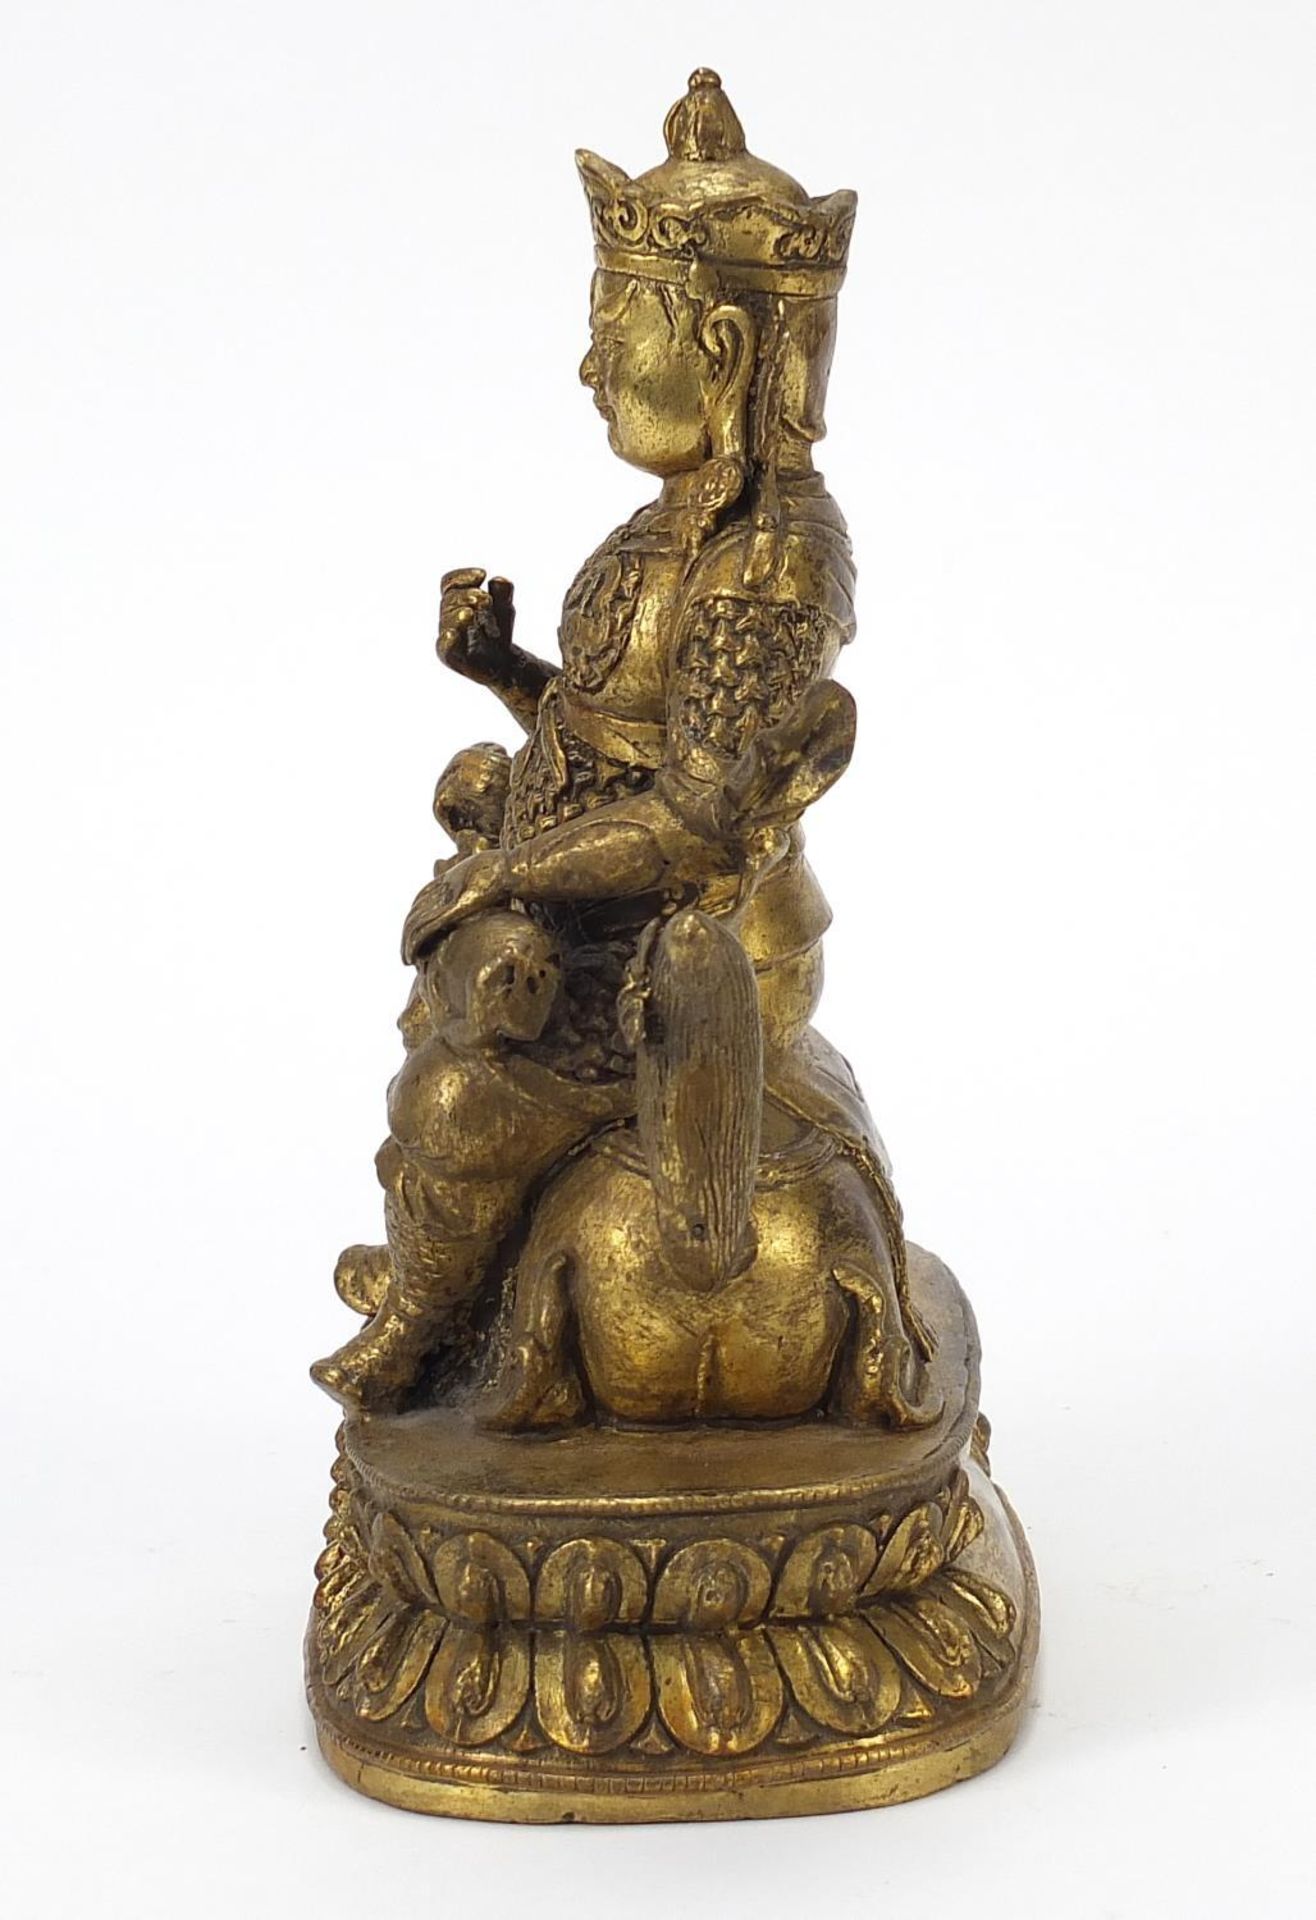 Chino Tibetan patinated gilt bronze figure of an Emperor on mythical animal, 23.5cm high - Image 3 of 8